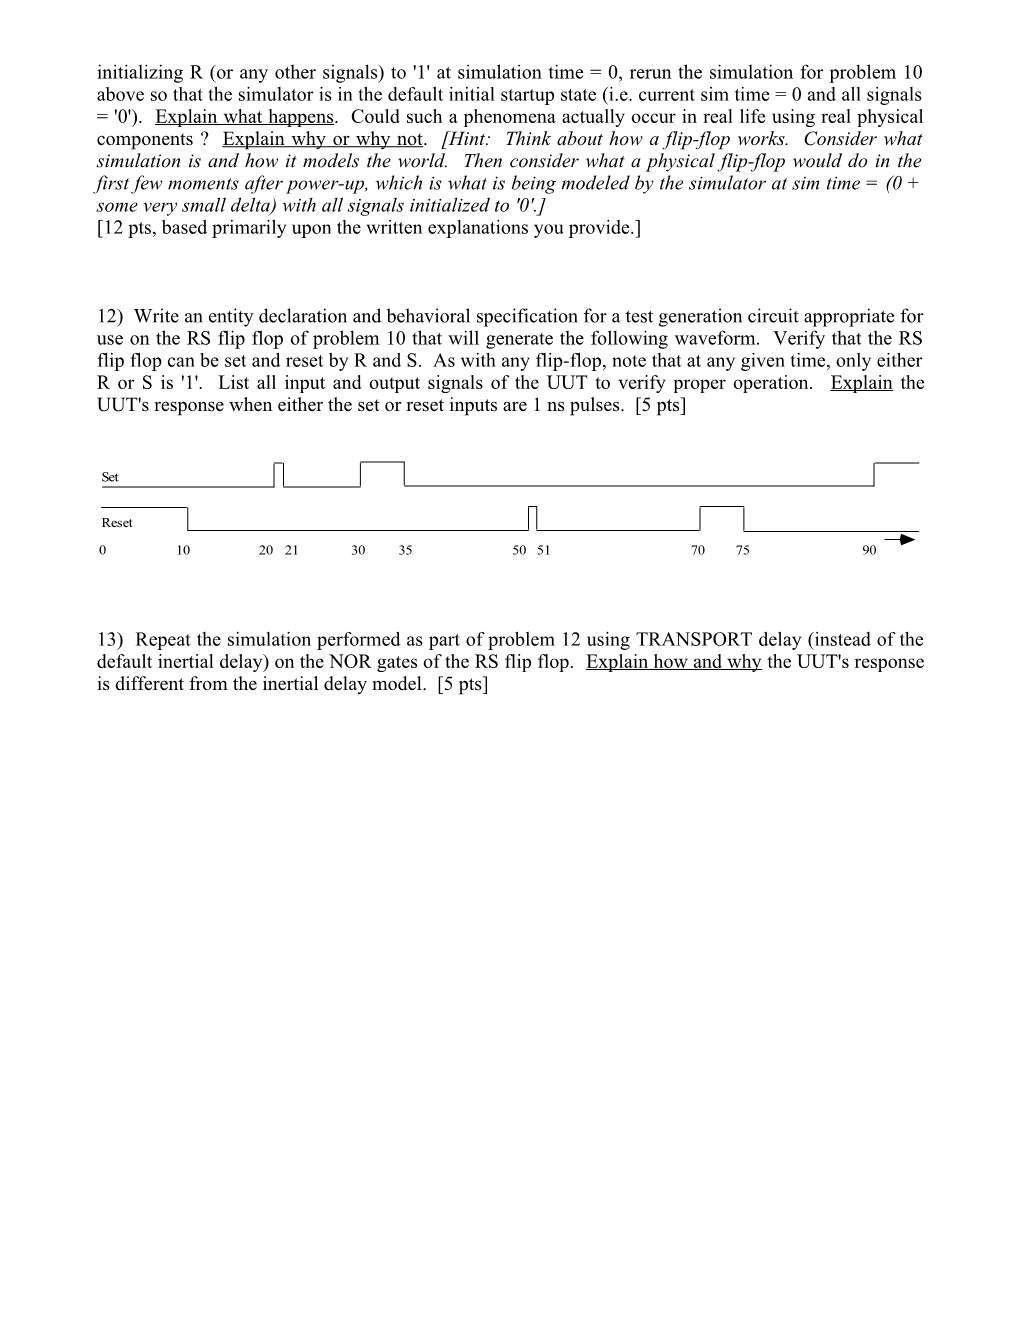 For the Following Problems, Hand in Printouts of All the VHDL Source Code and Signal Waveforms